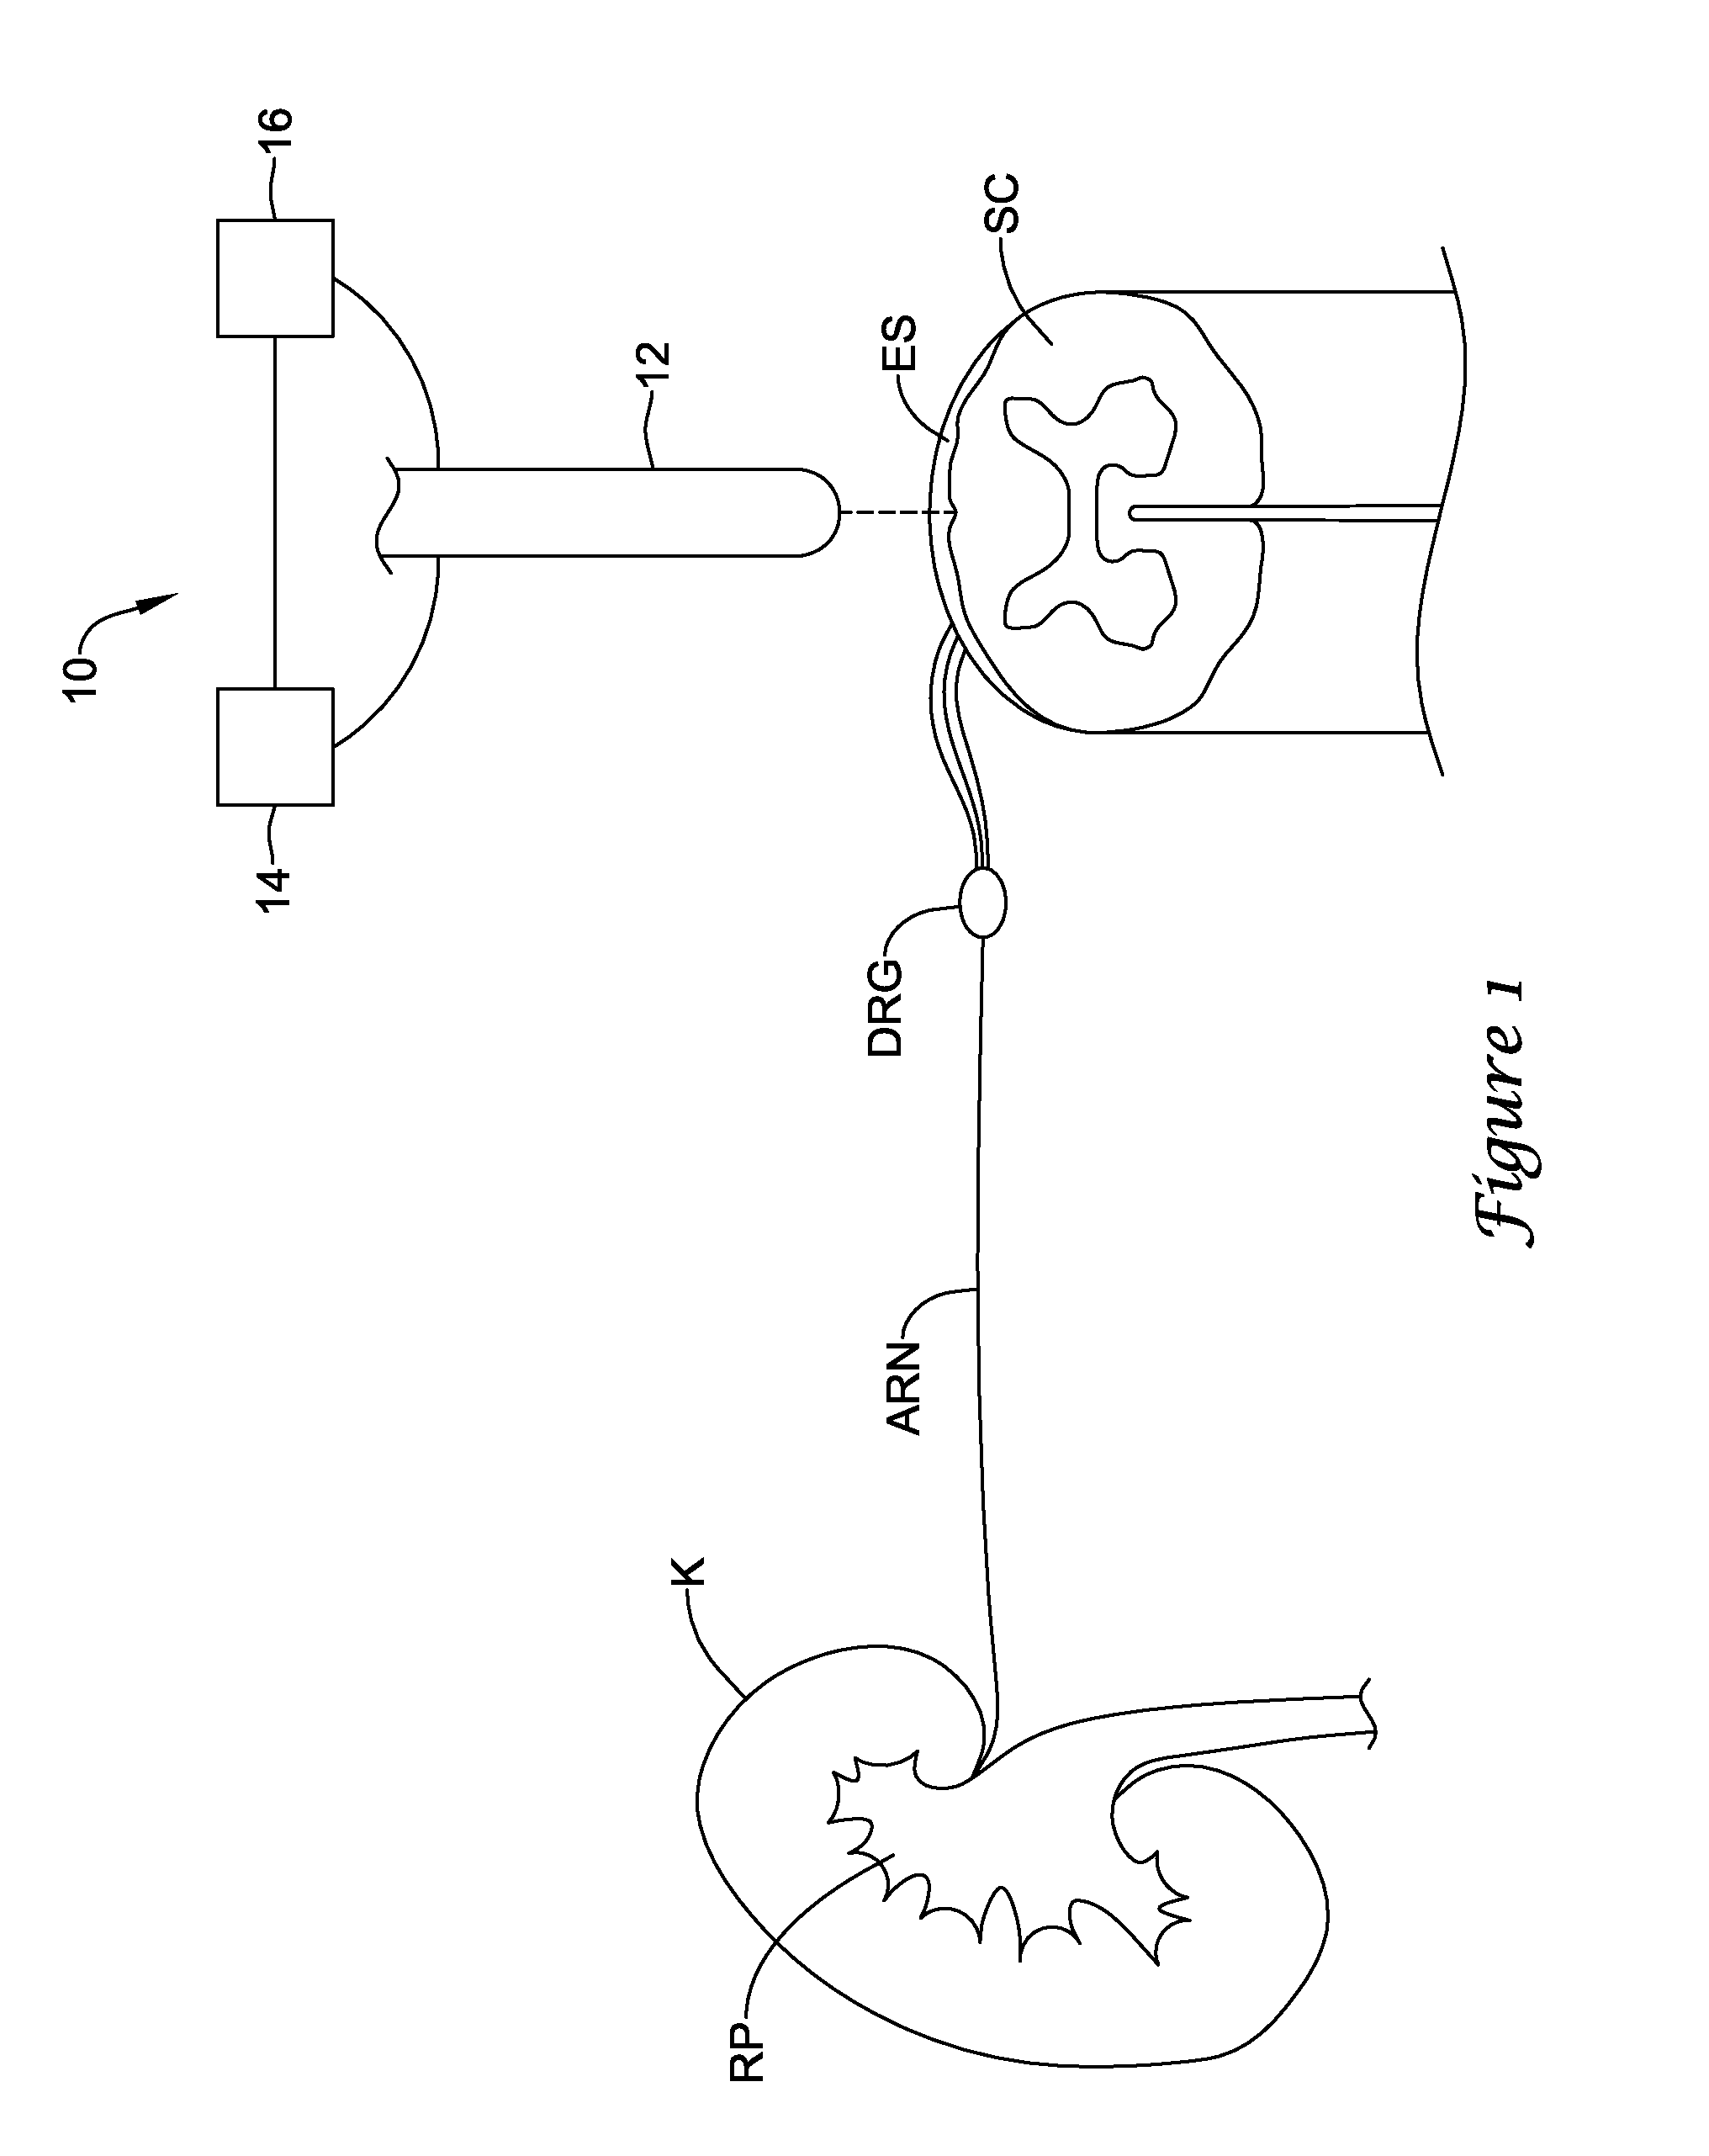 Methods for modulating cell function